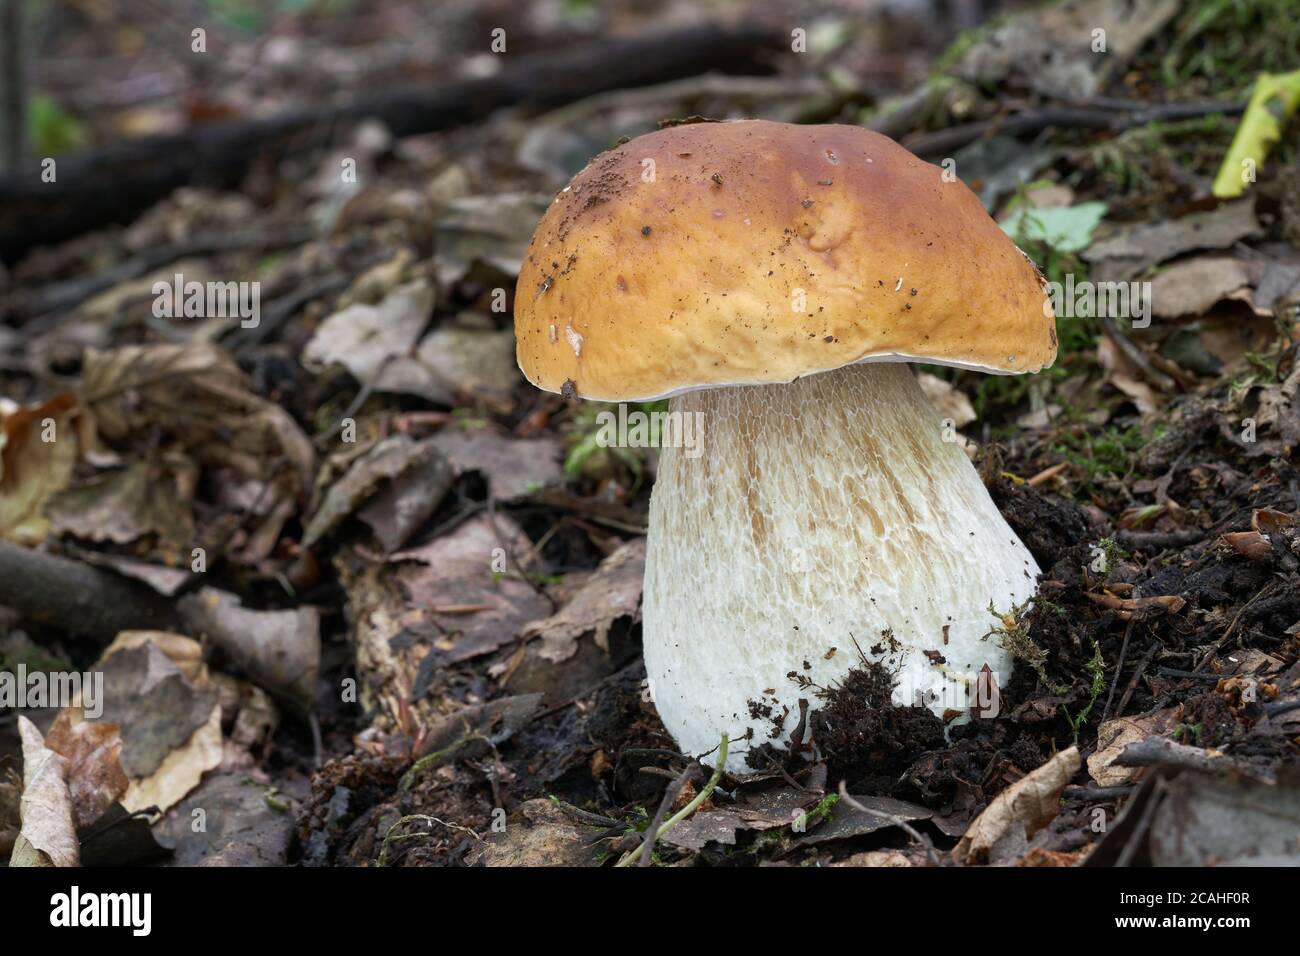 Edible mushroom Boletus edulis in the birch forest. Known as Cep, Penny Bun or Porcini. Wild mushroom growing in the leaves. Stock Photo